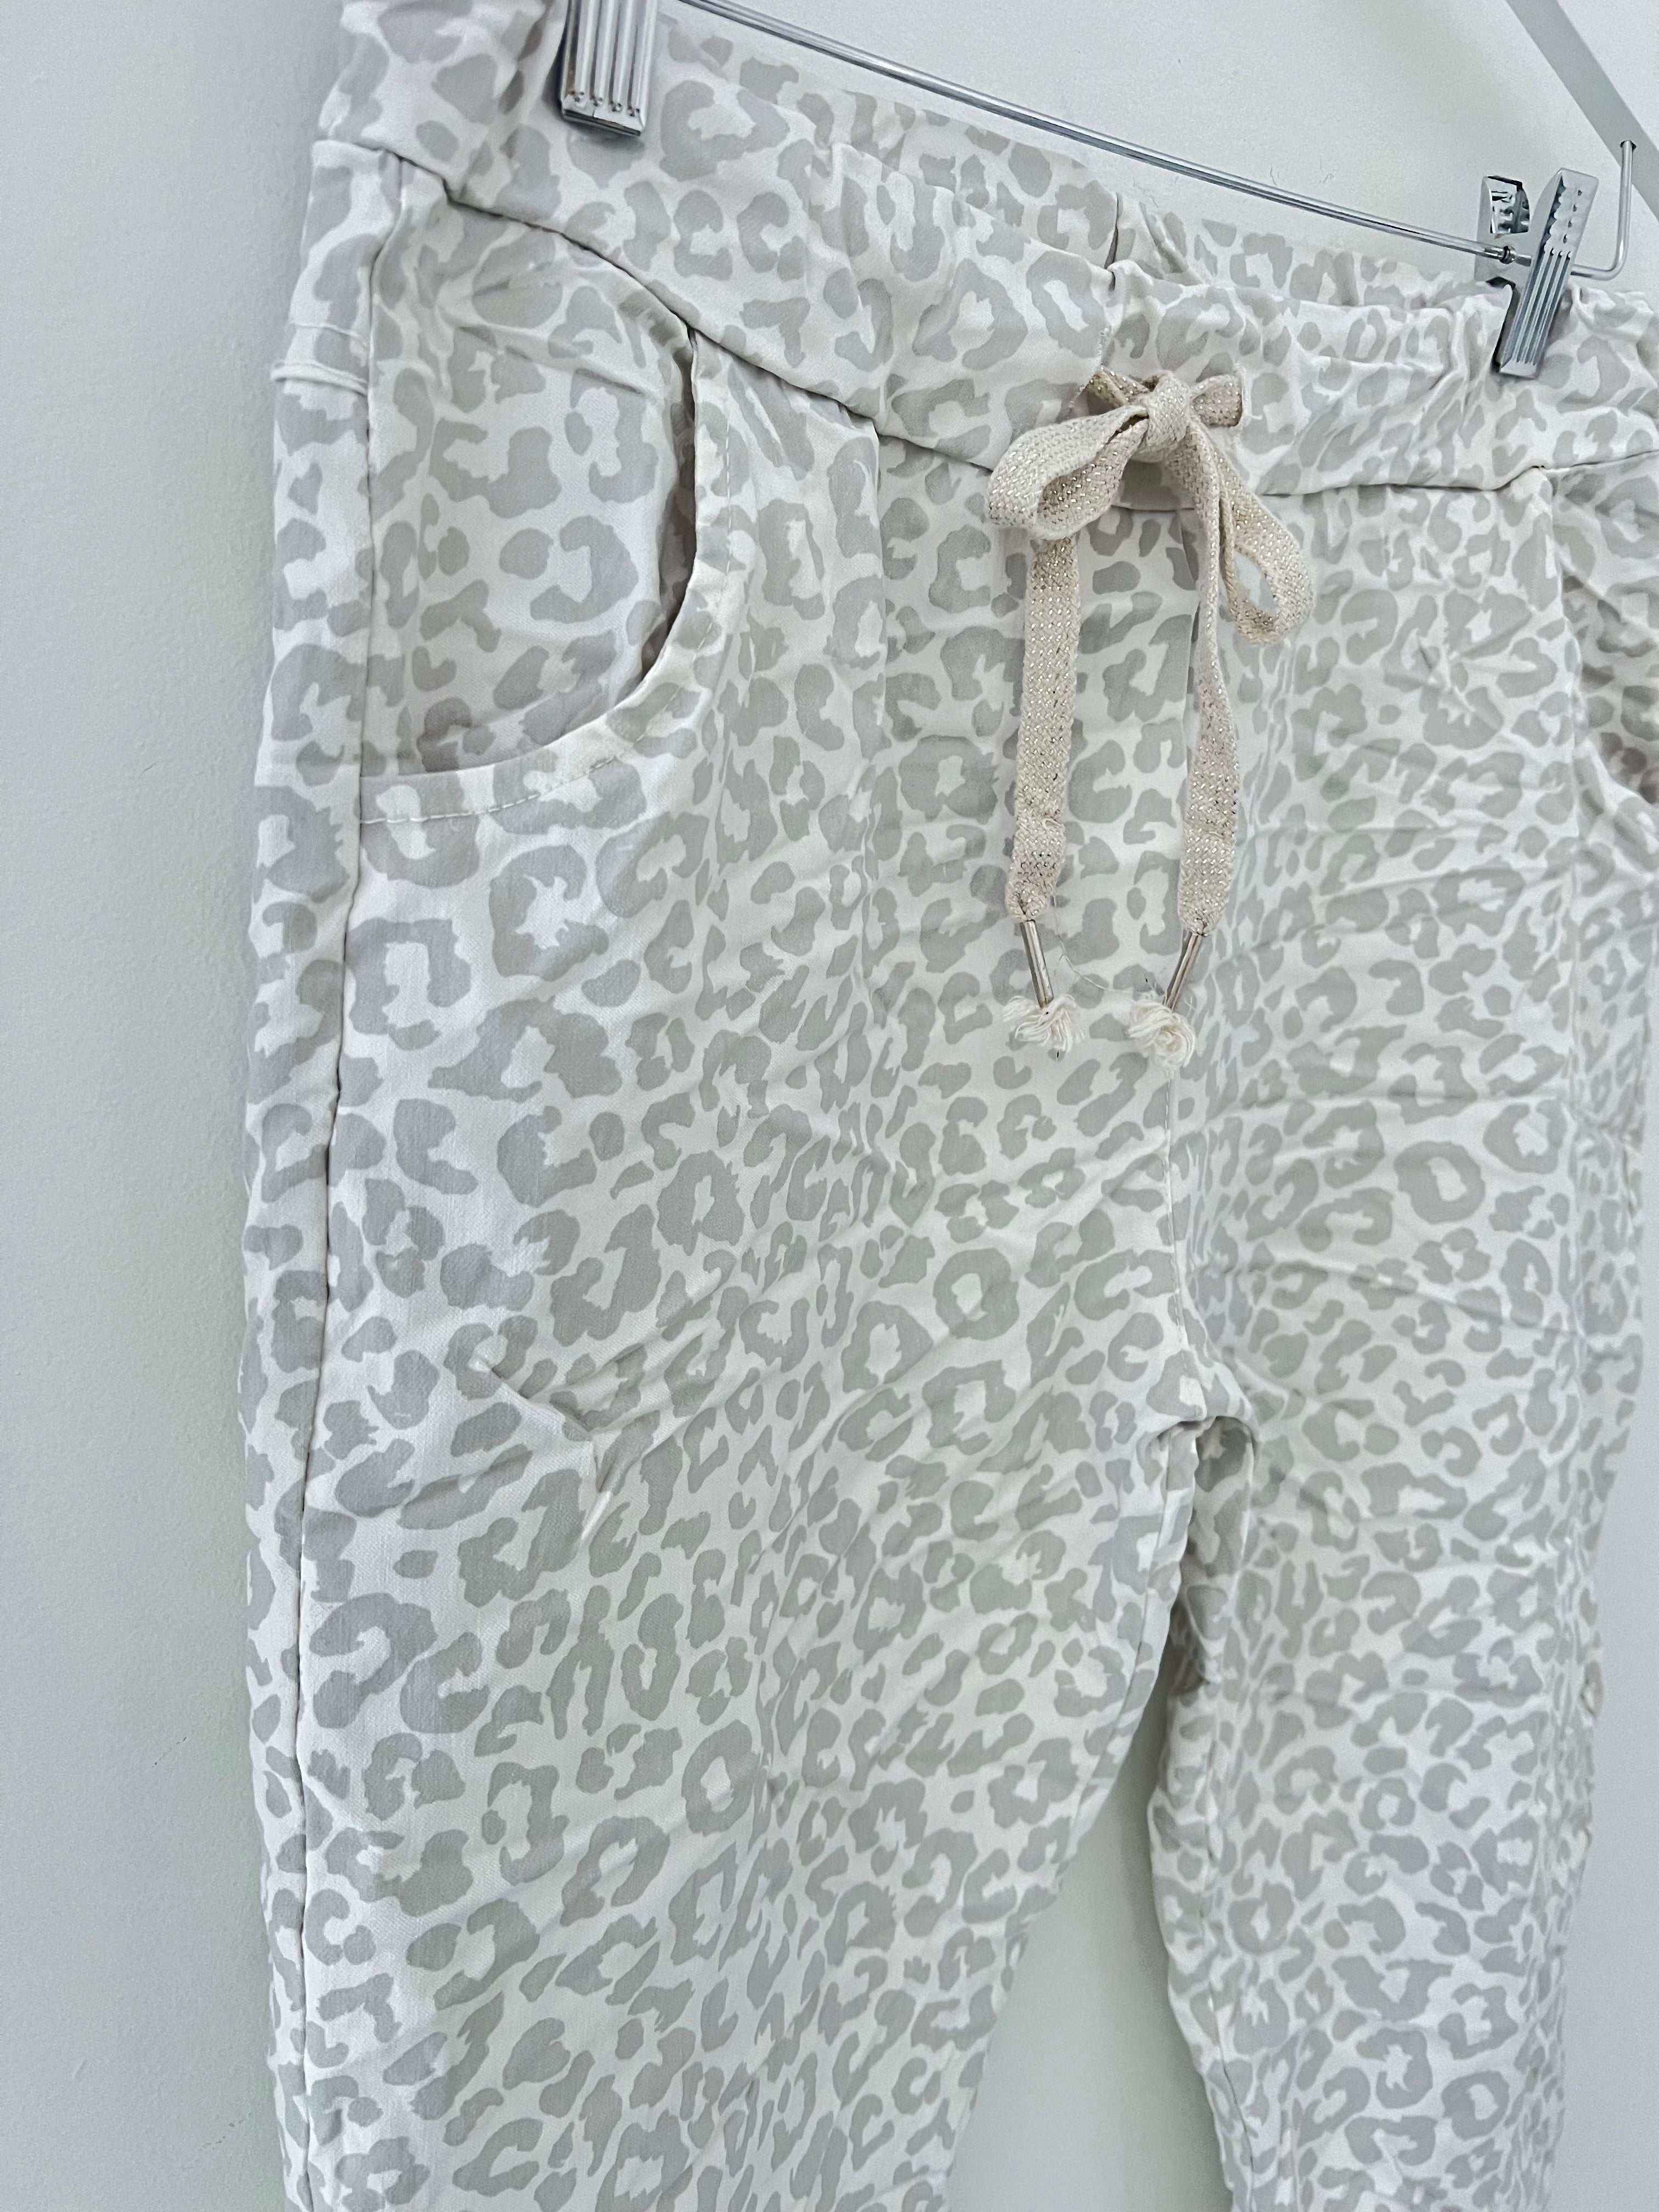 Slimfit Cotton Stretch Joggers in White Leopard